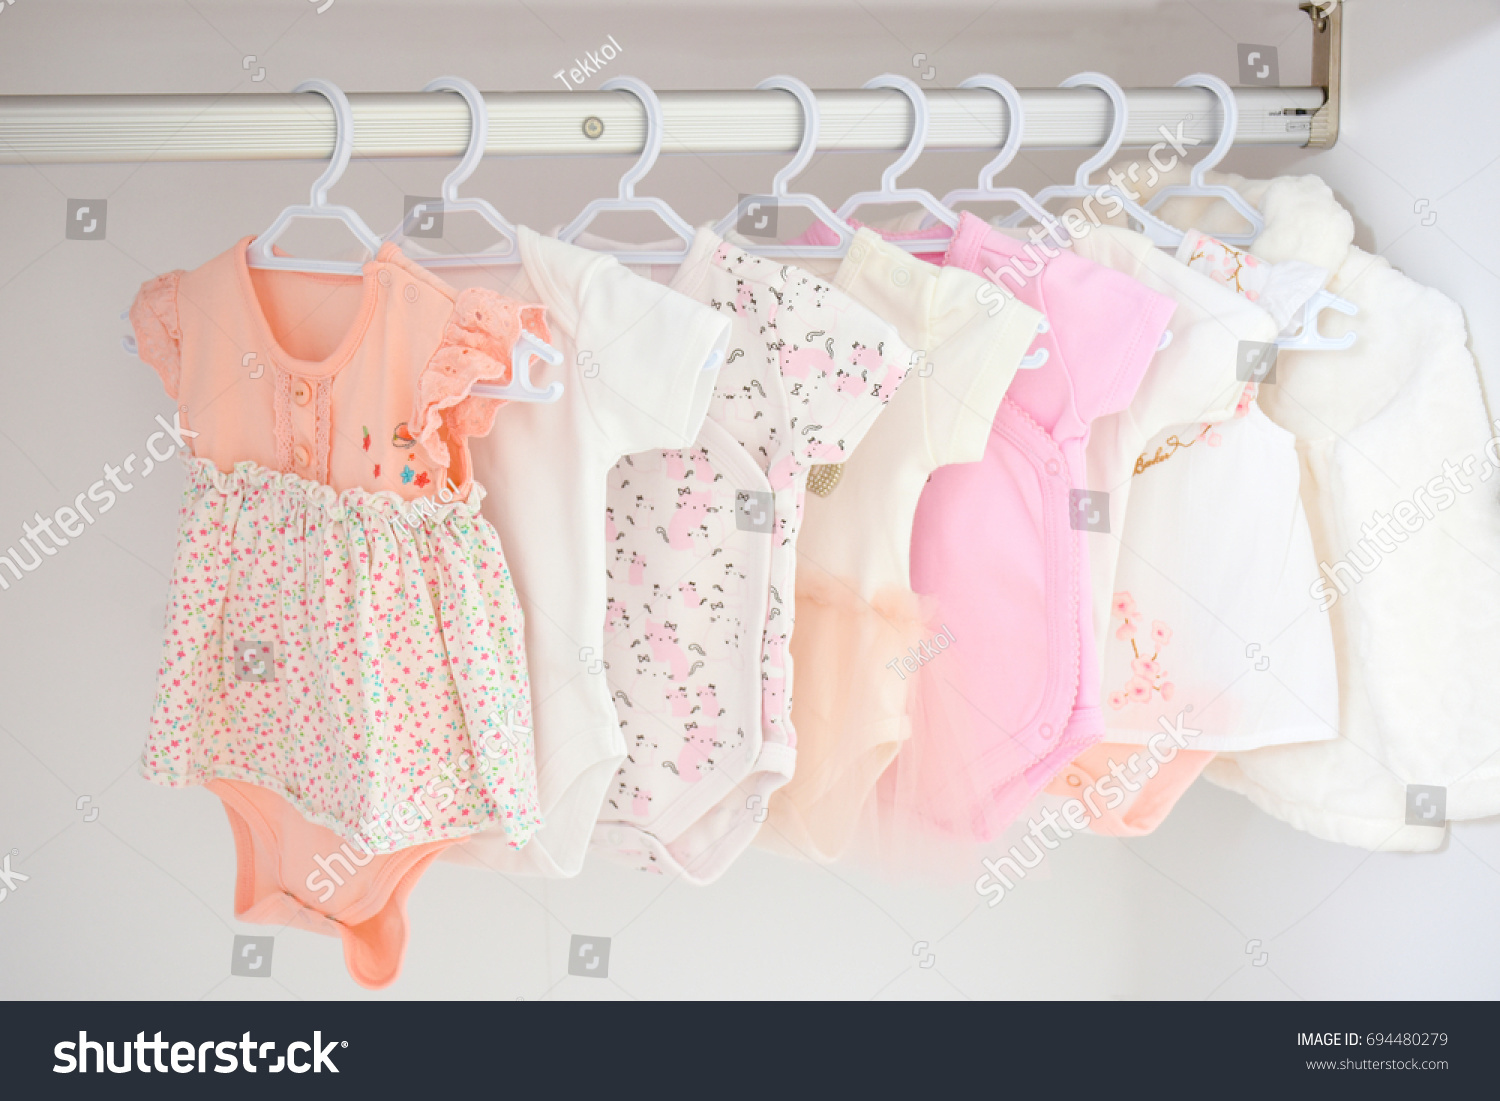 Colorful, cute girl baby dresses hanging on rack in wardrobe. Baby fashion concept design. #694480279